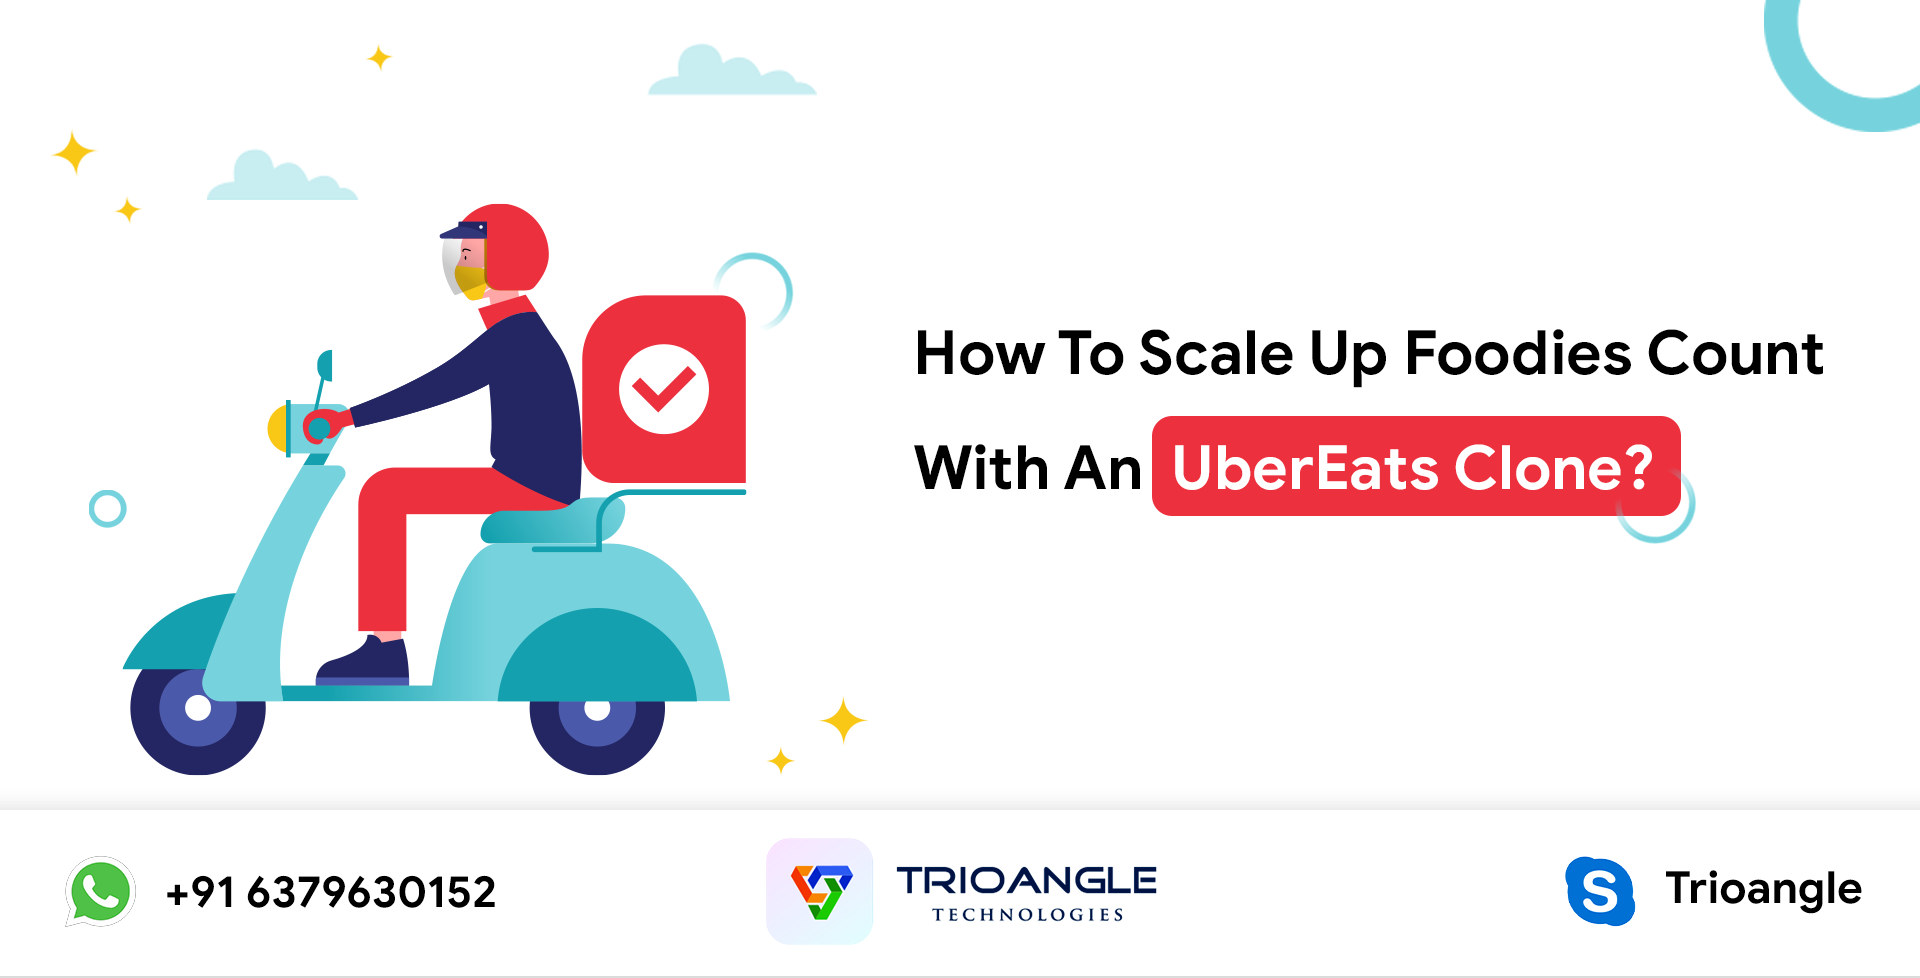 How to Scale Up Foodies Count with an UberEats Clone?